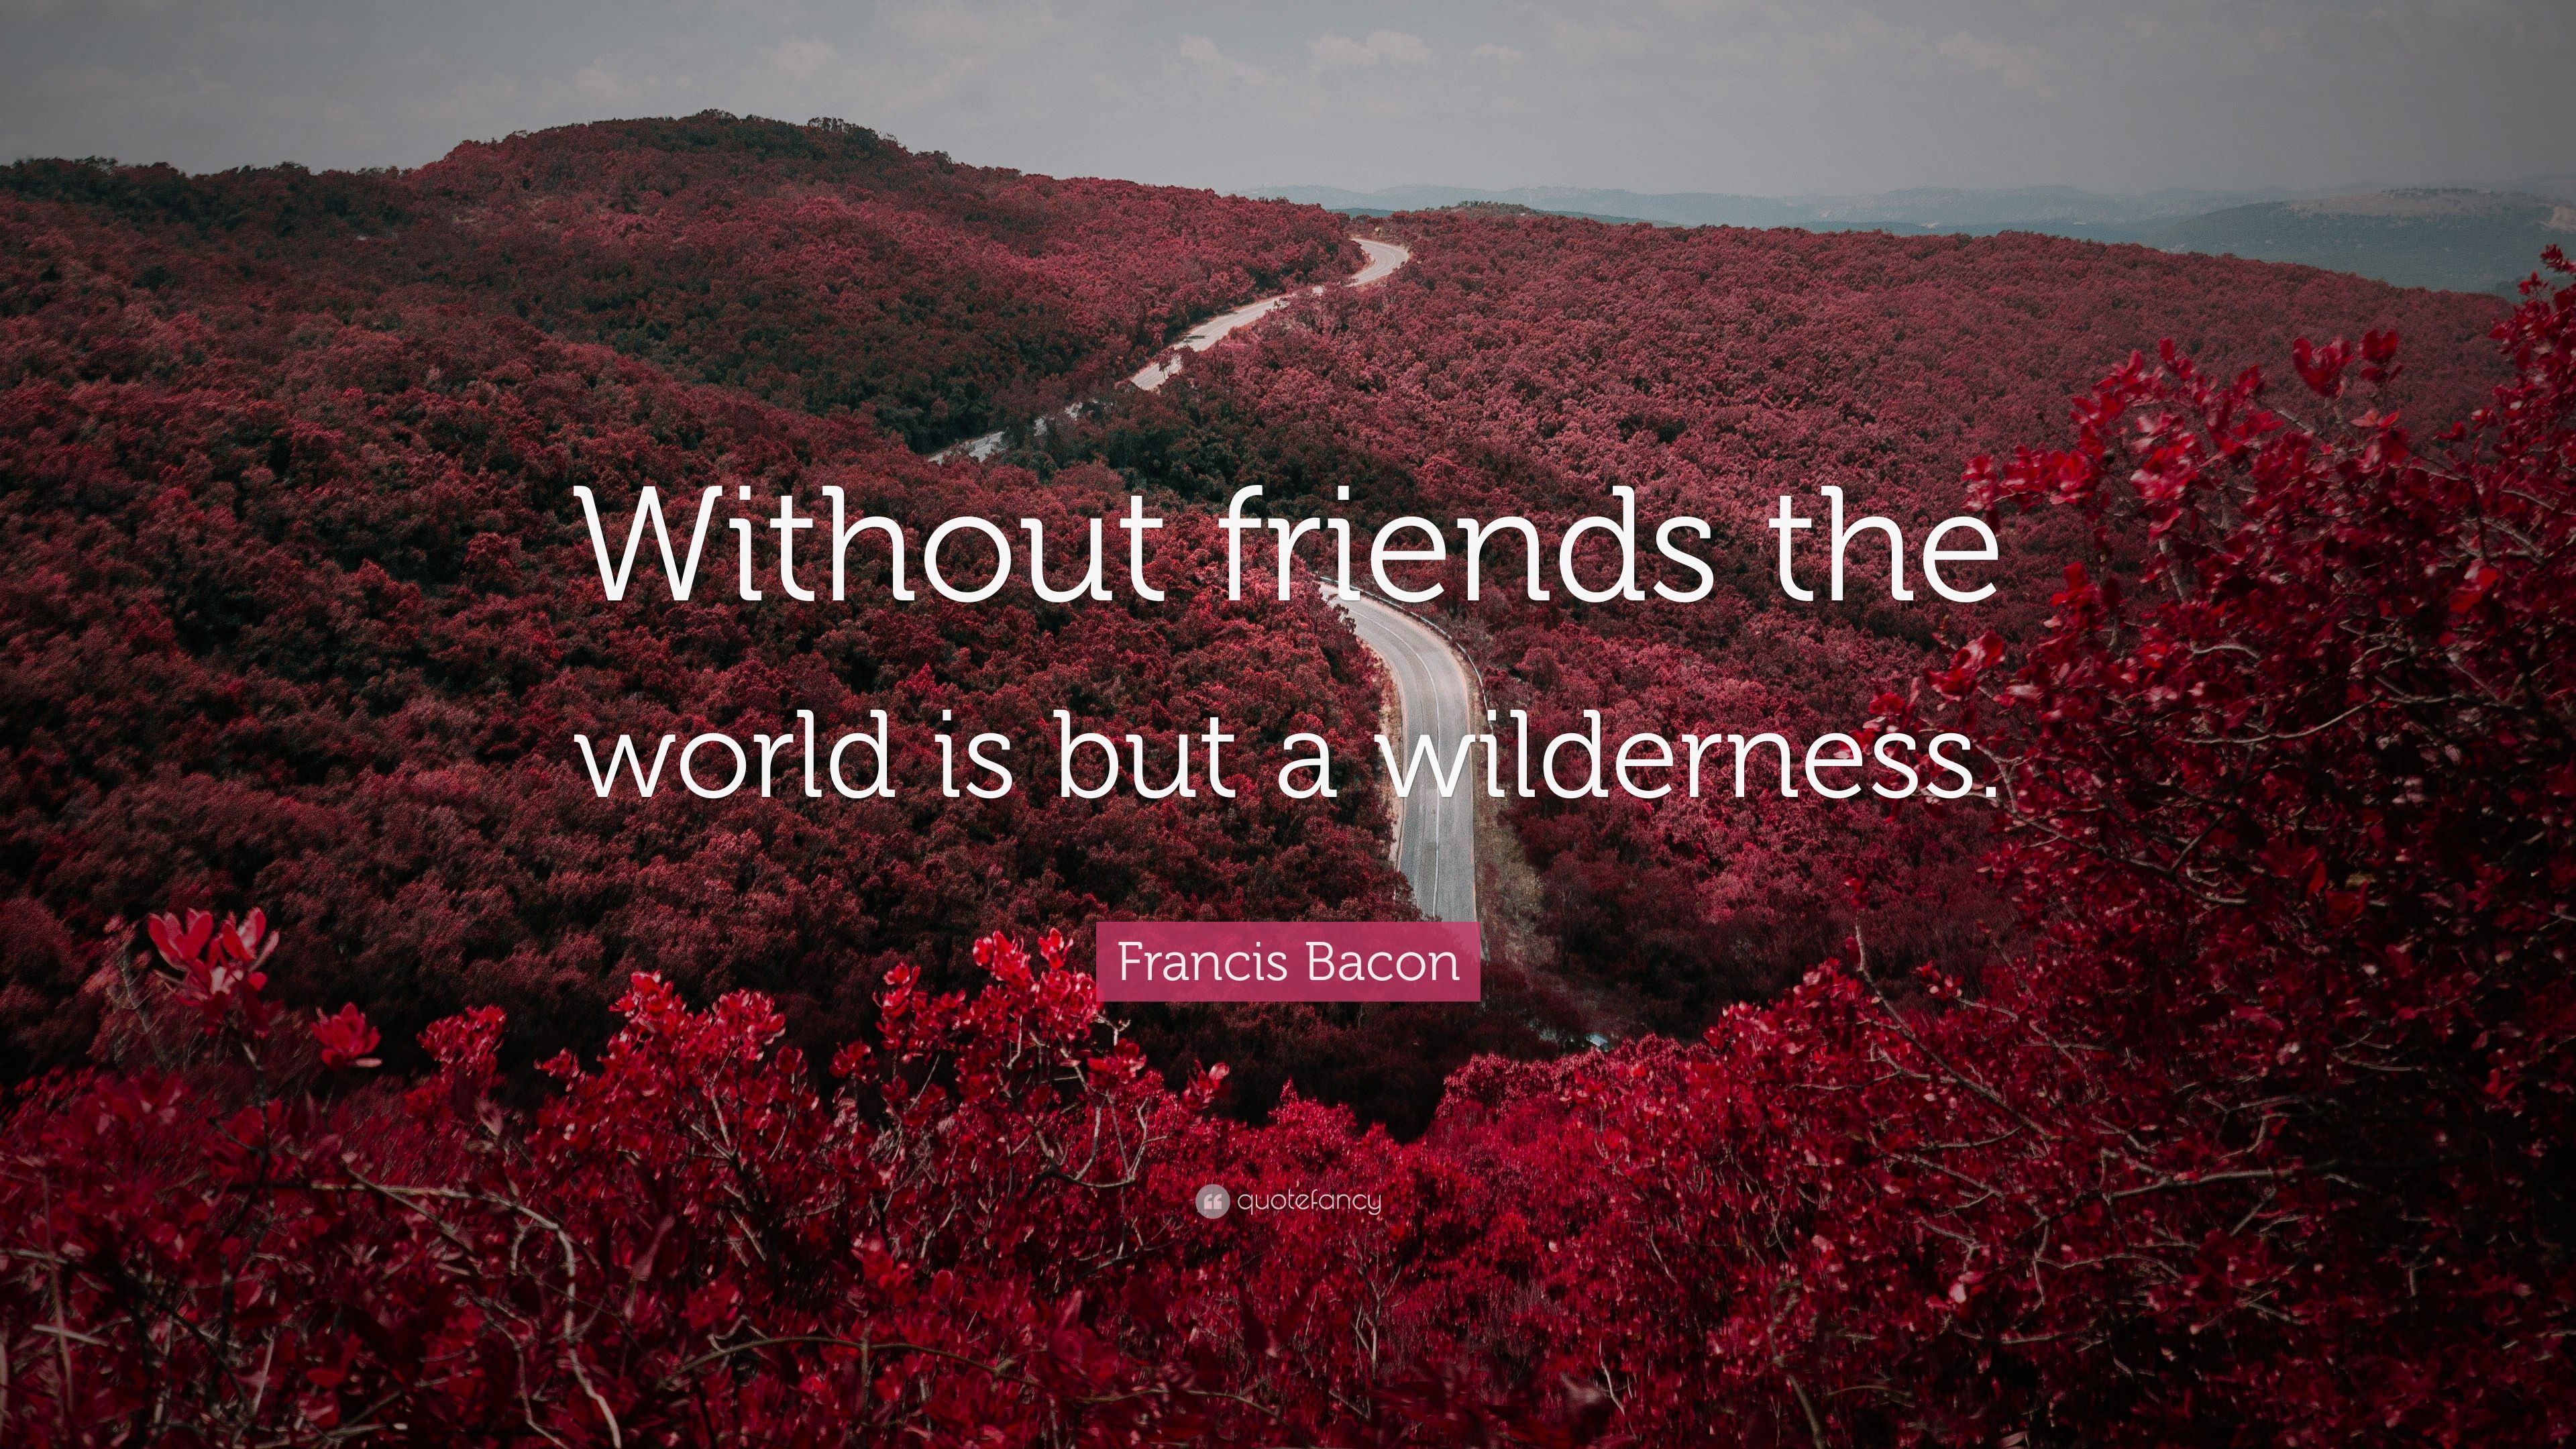 Francis Bacon Quote: “Without friends the world is but a